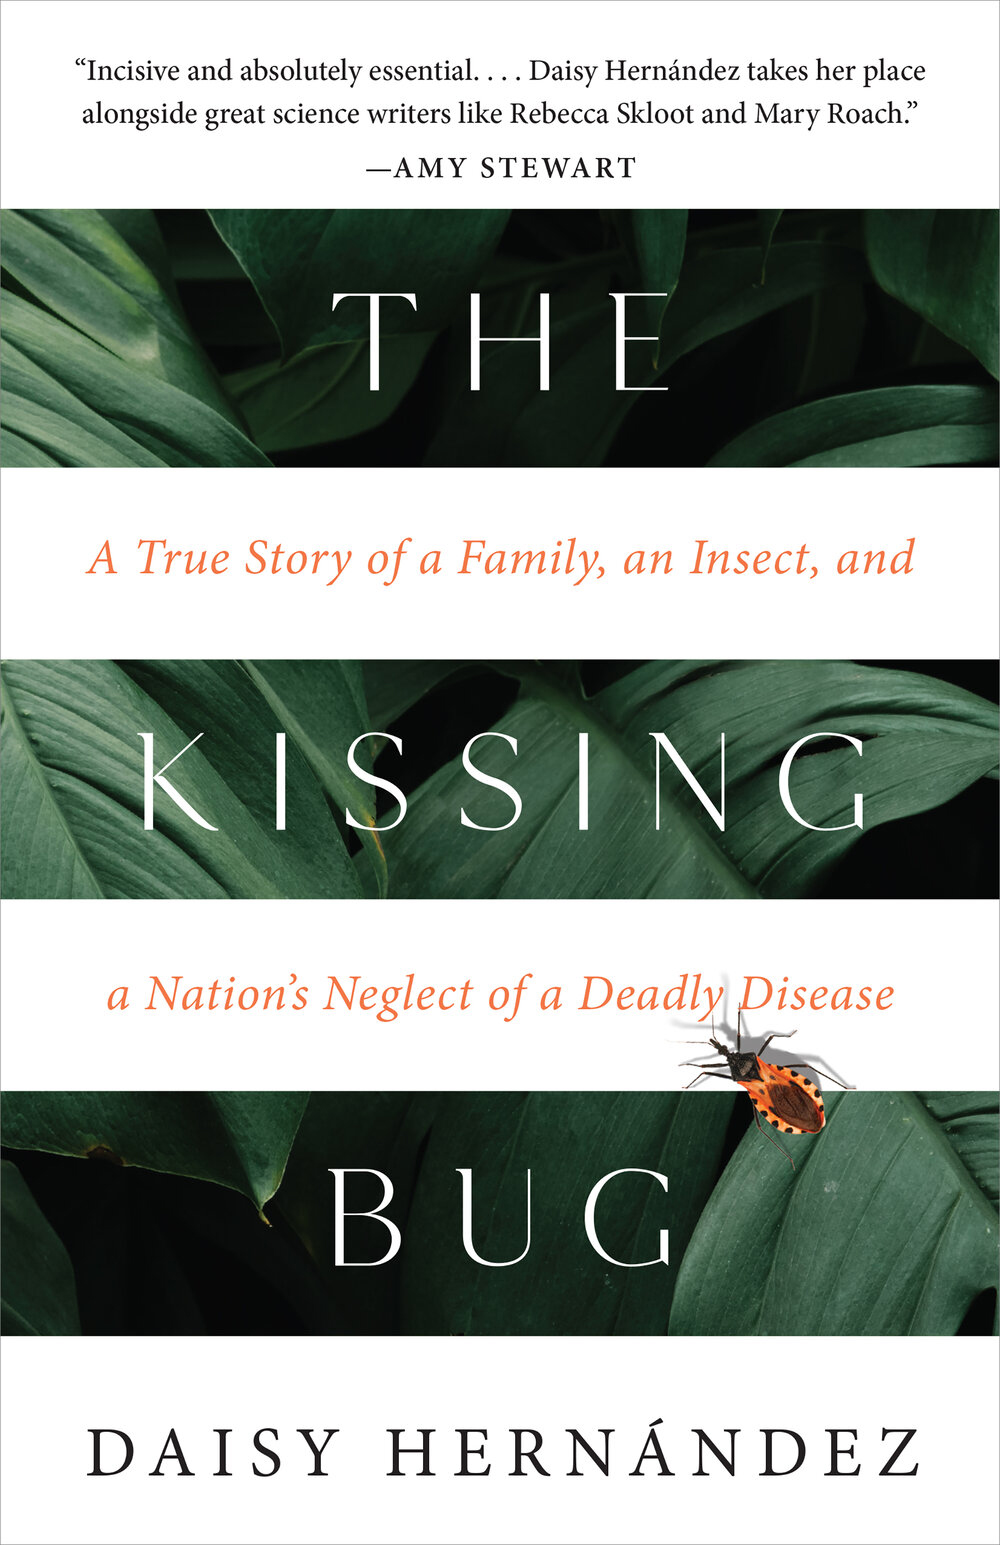 http://www.miamioh.edu/news/top-stories/2021/06/daisy-hernandez-the-kissing-bug-cover.jpeg